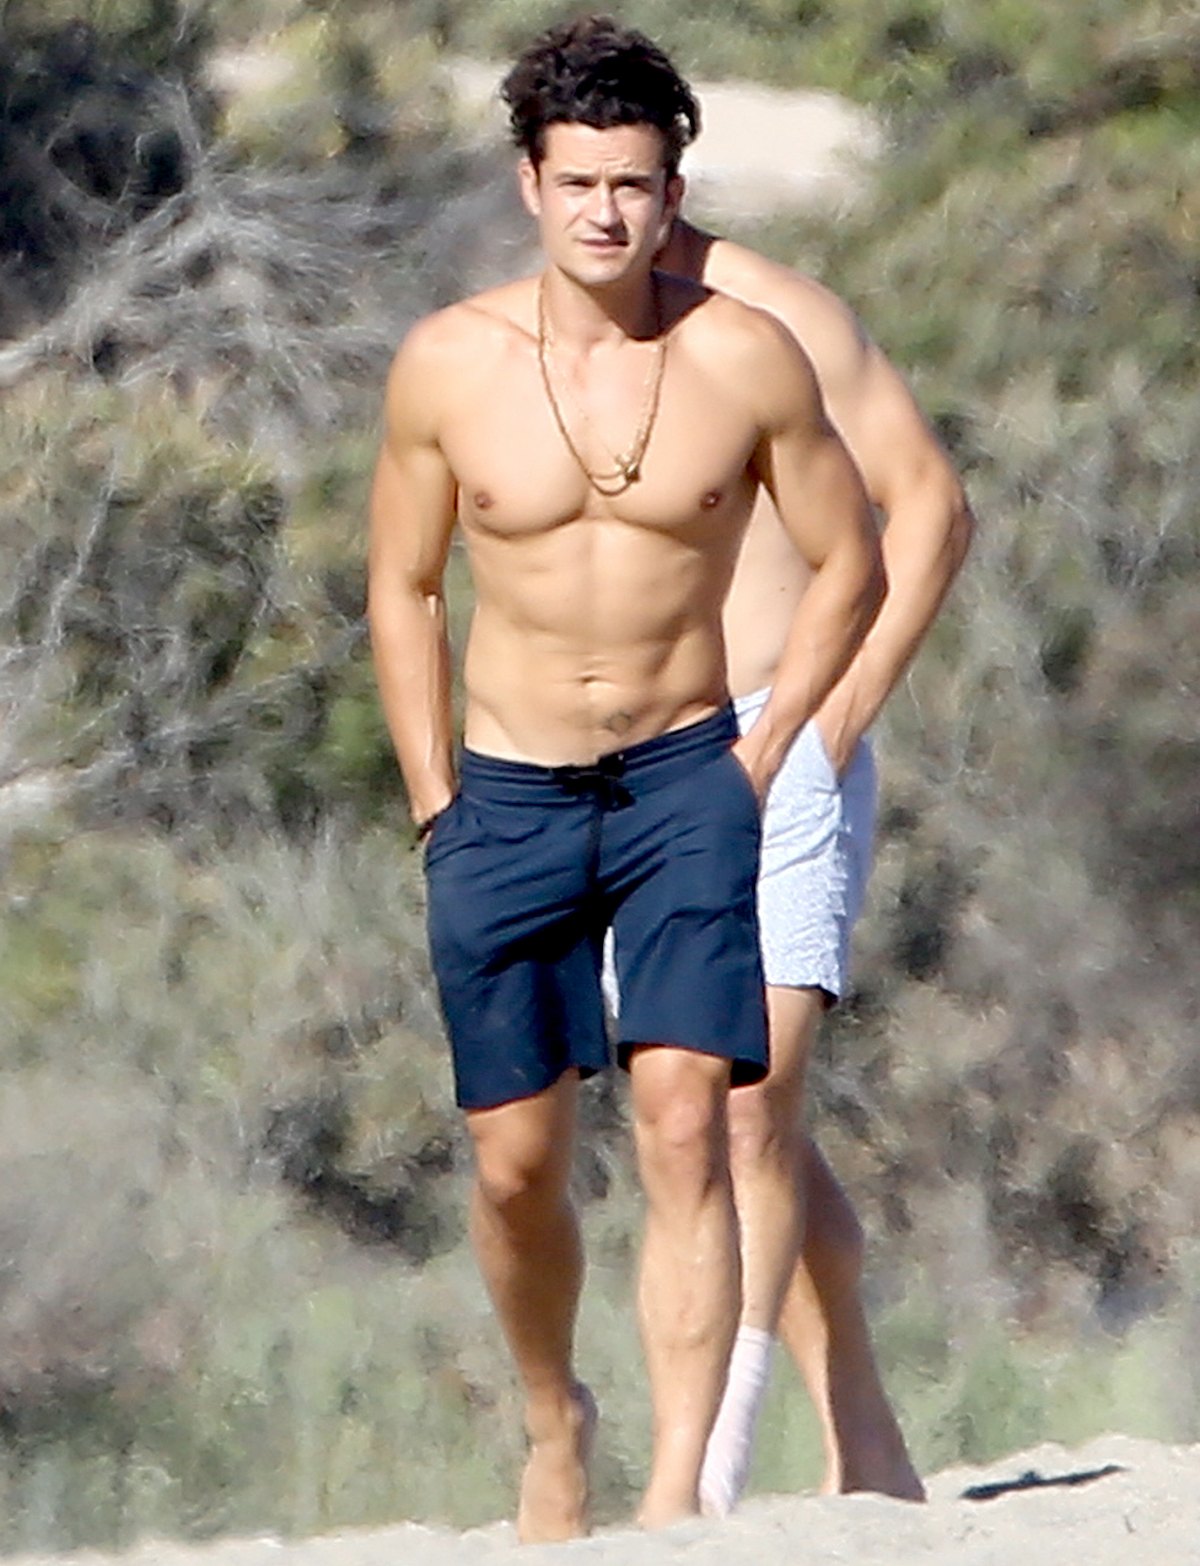 Orlando Bloom Shows Off His Hot Body During Shirtless Stroll